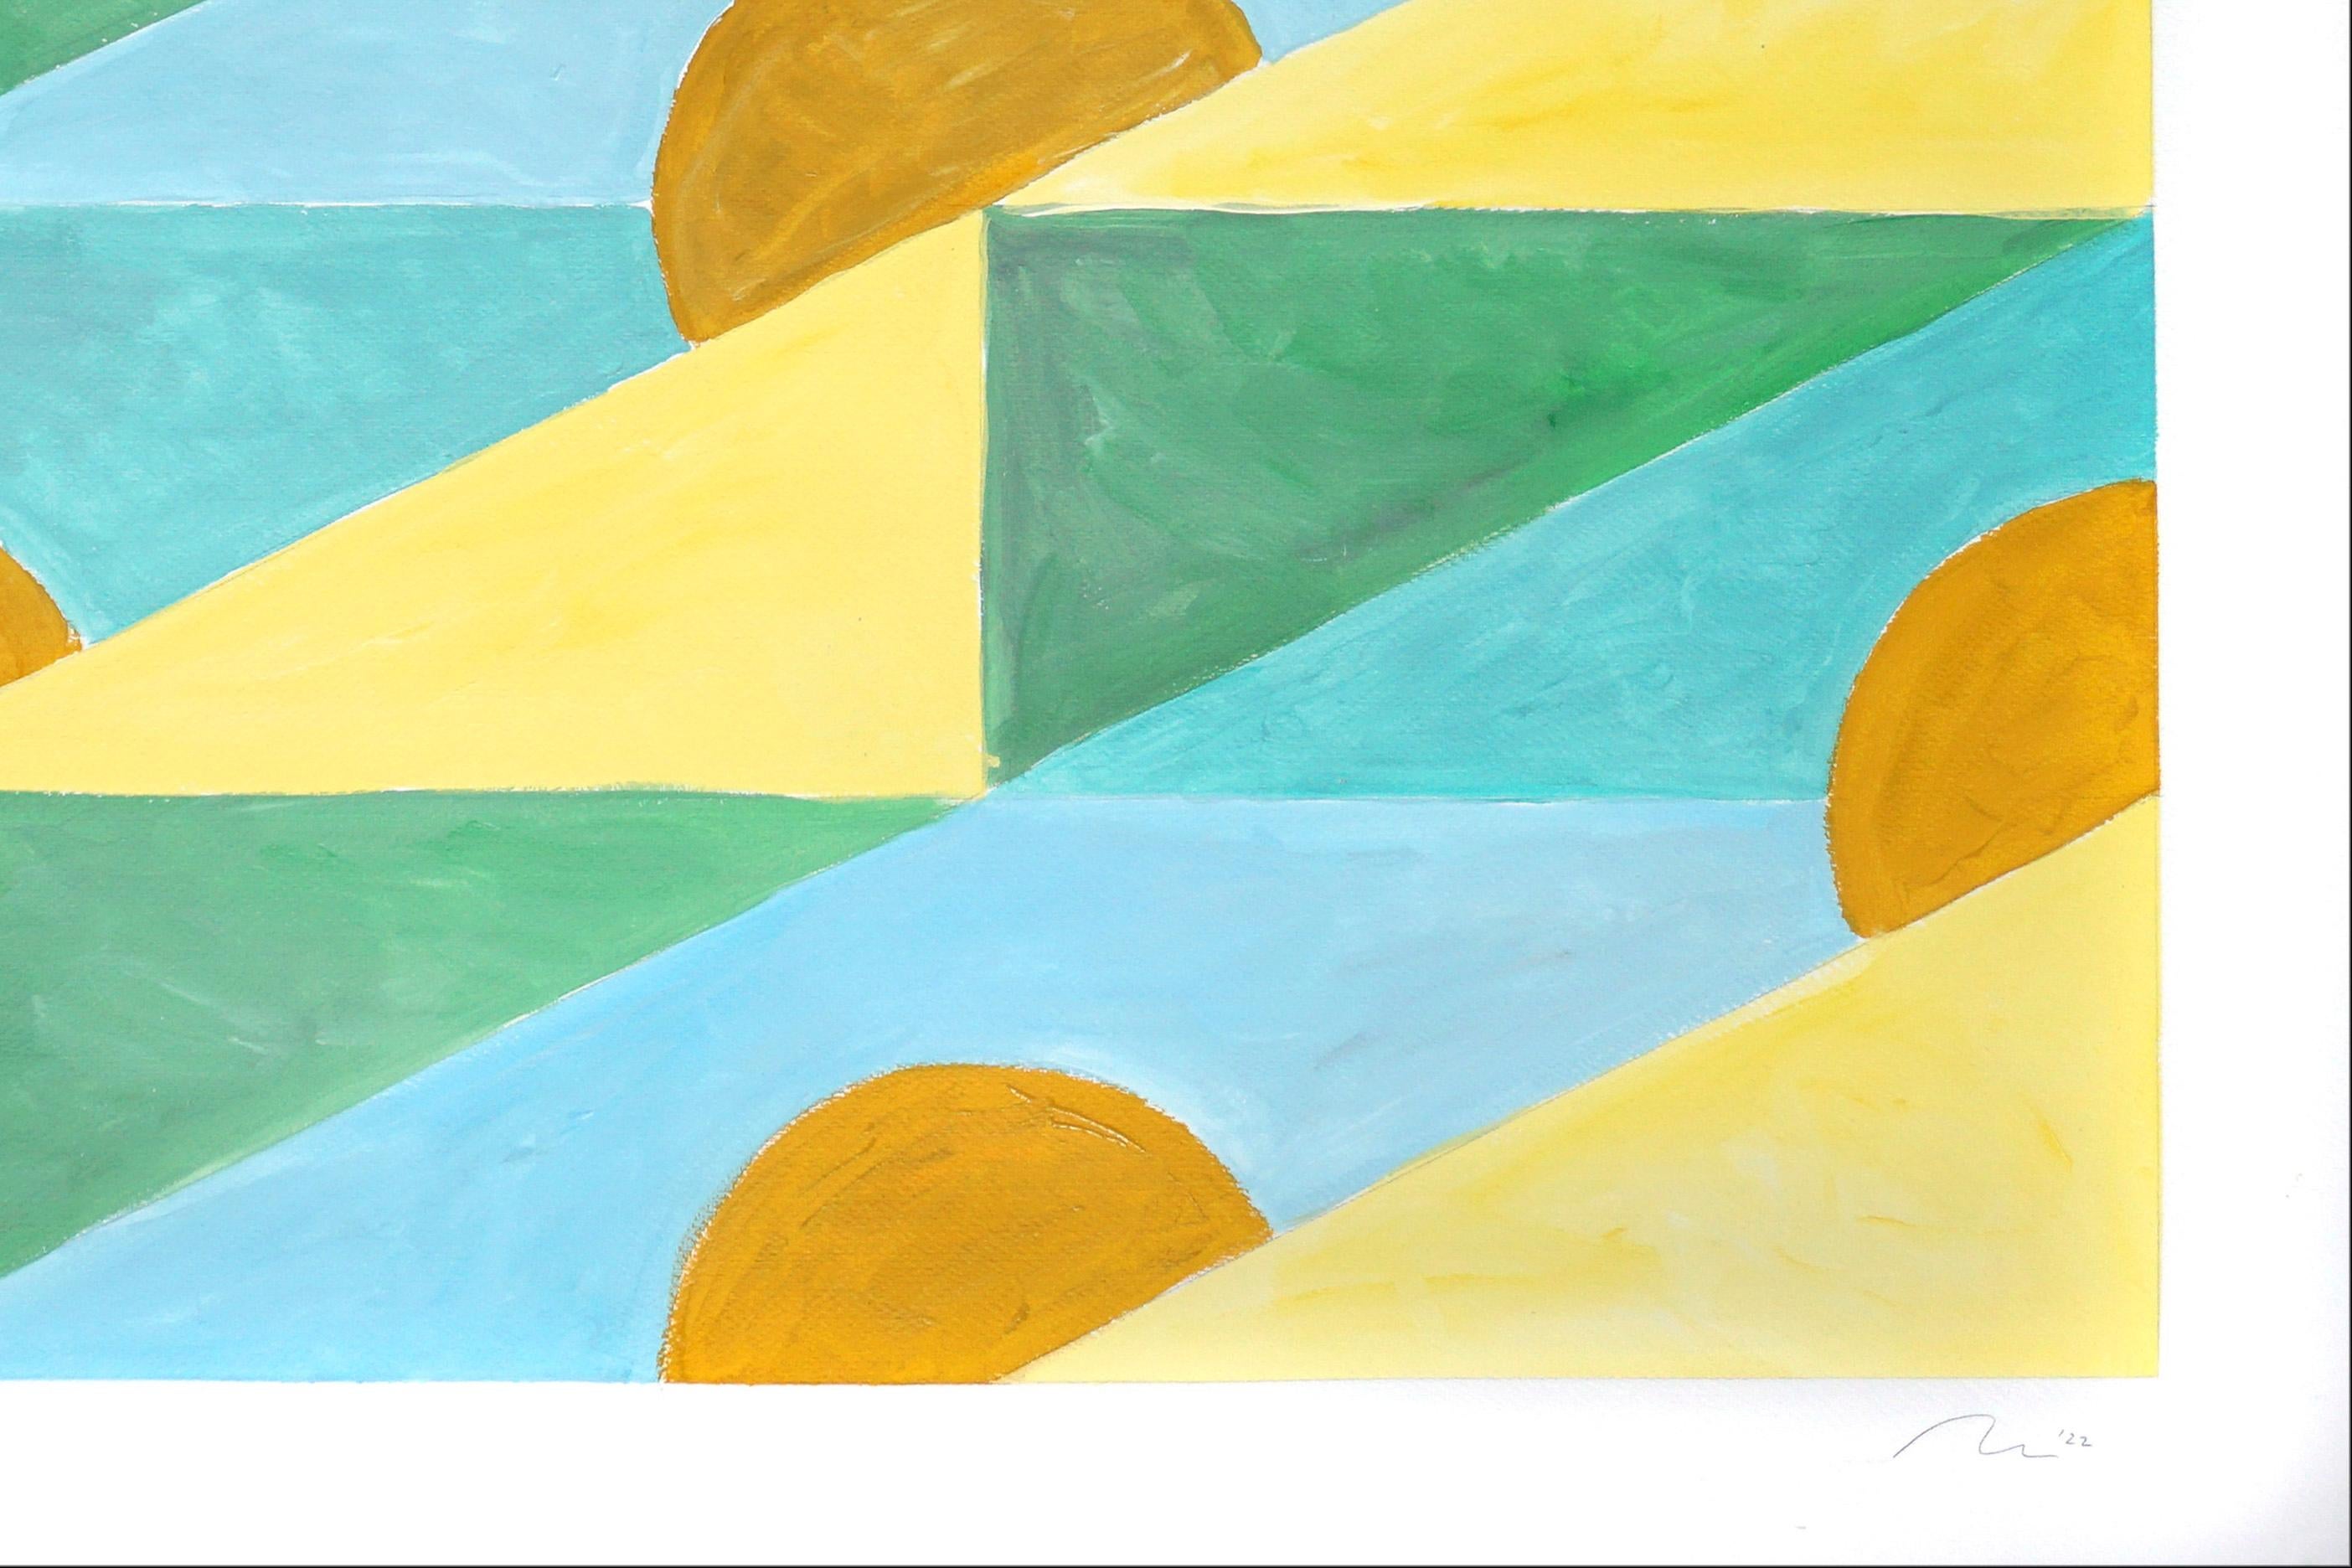 Golden Sunset Beaches, Yellow, Green and Turquoise, Triangles Stairs Light Tones - Bauhaus Painting by Natalia Roman